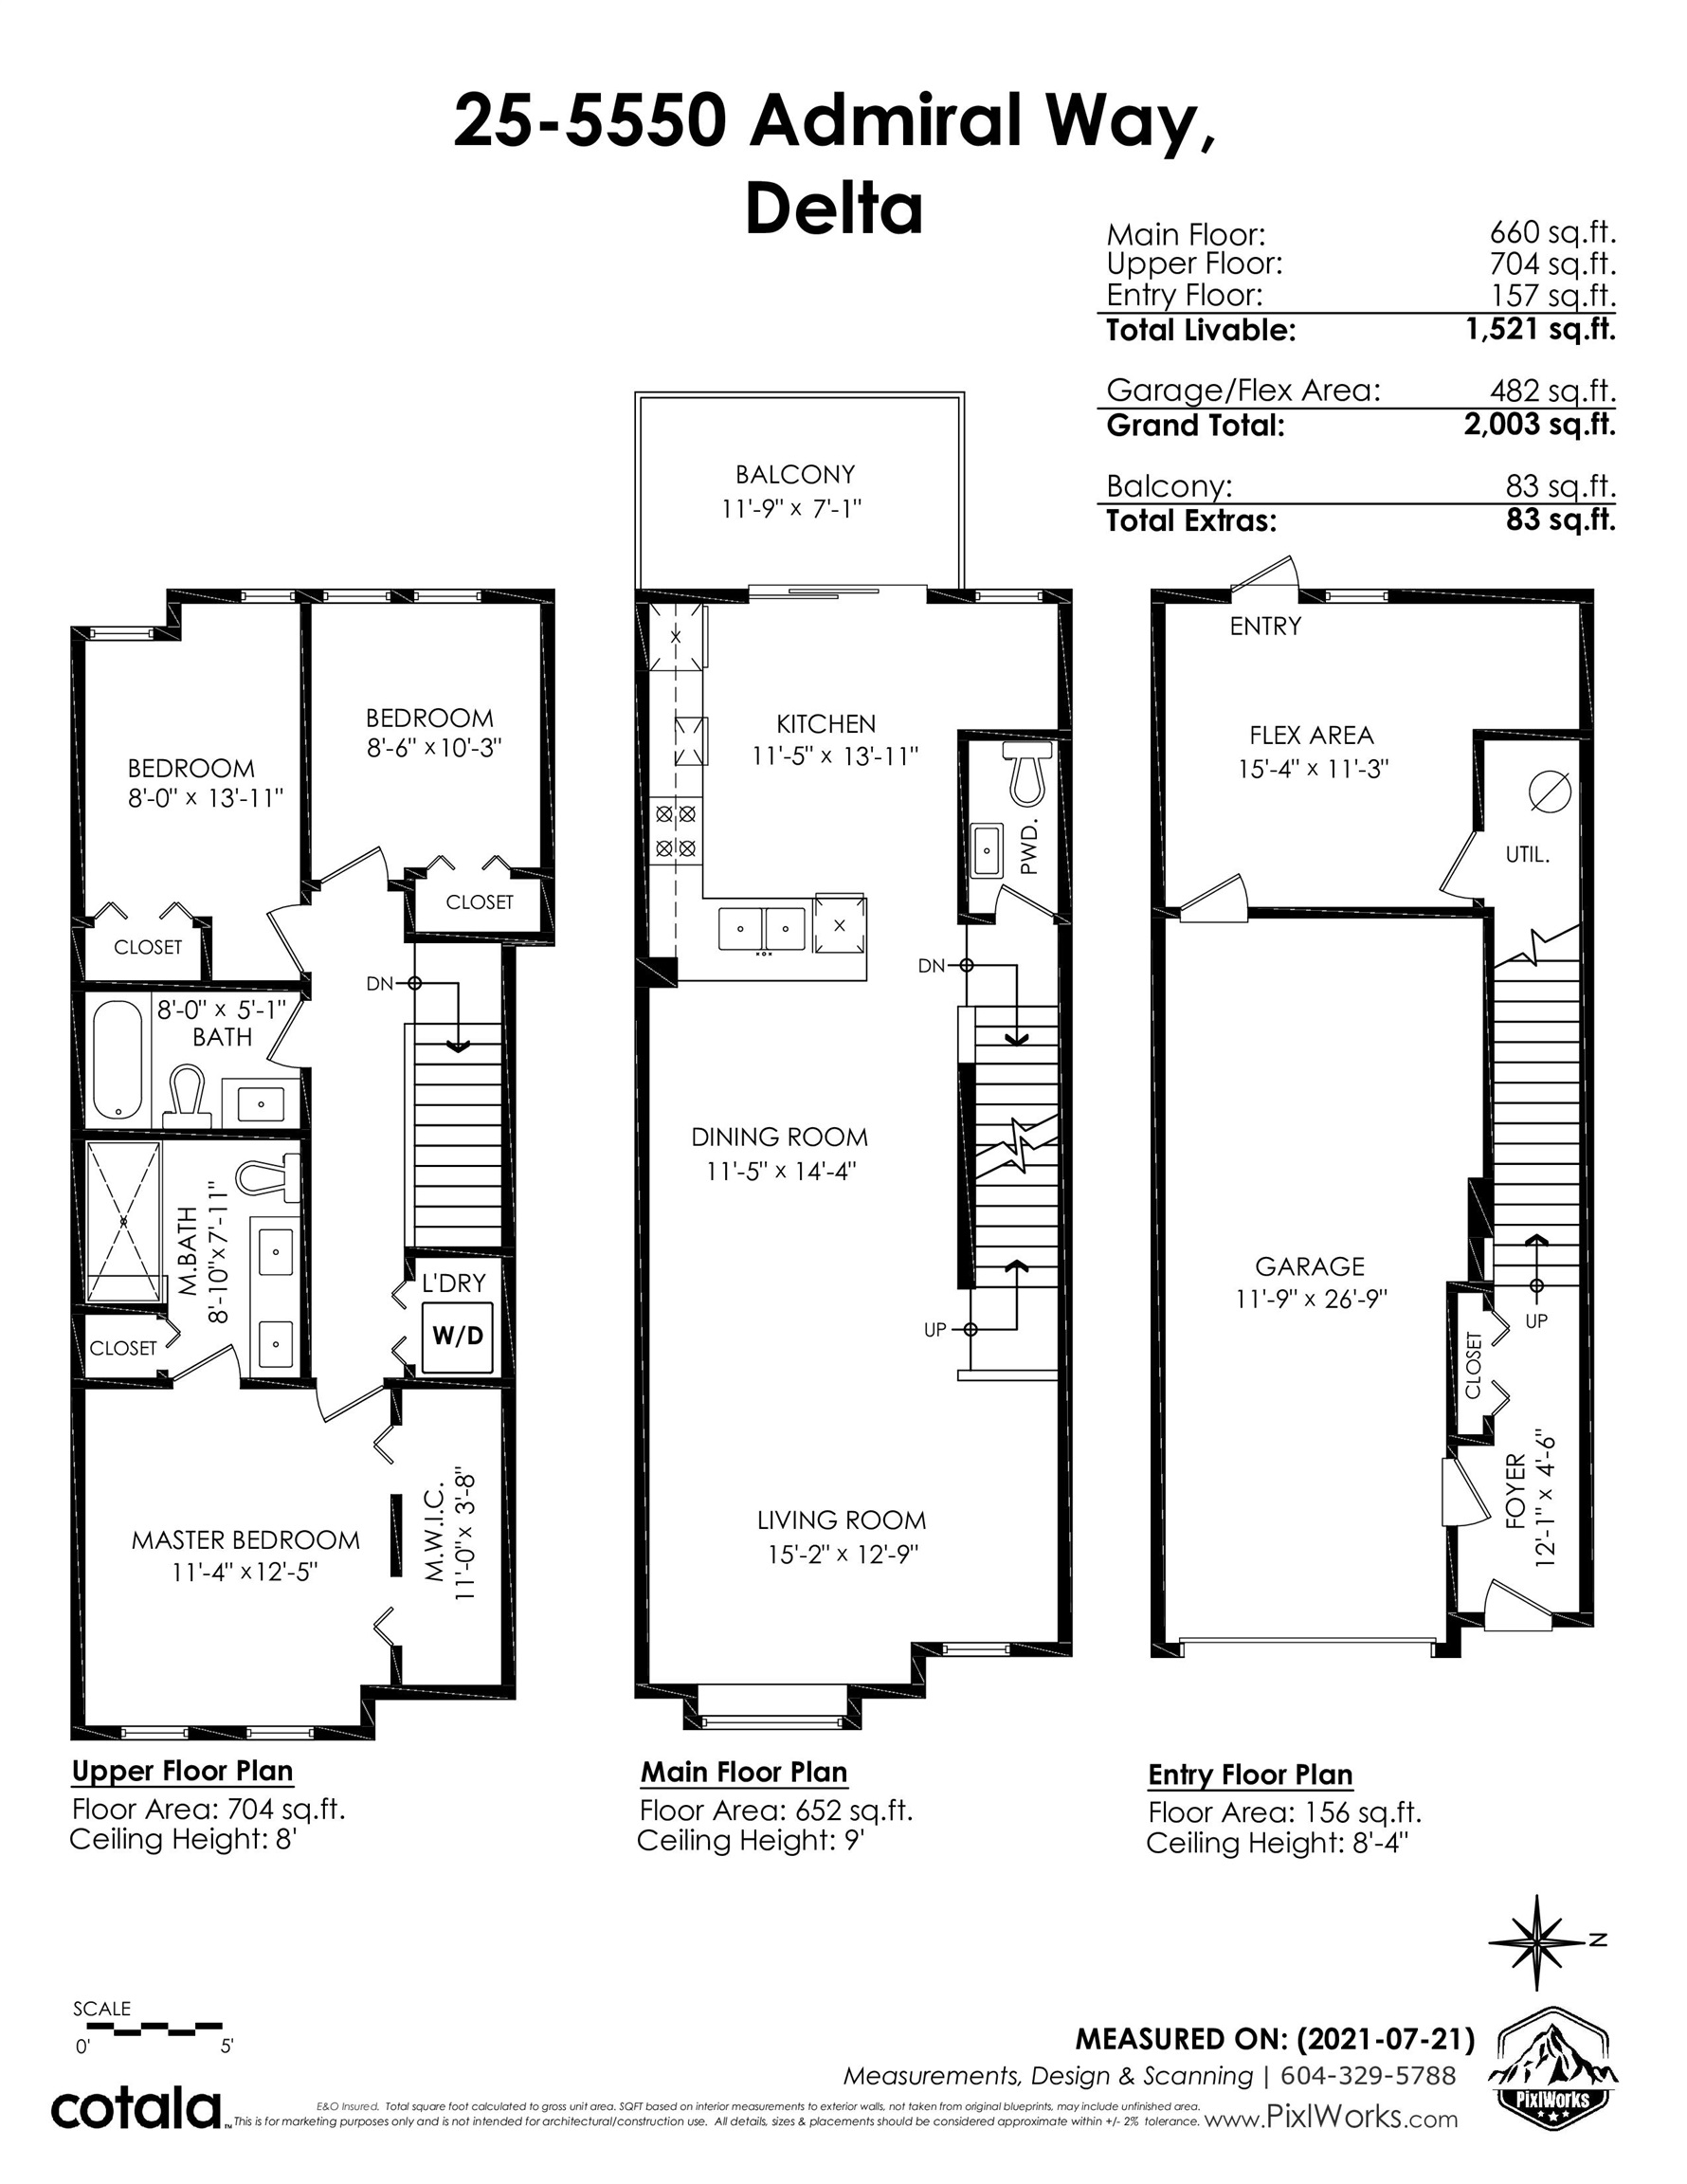 Listing image of 25 5550 ADMIRAL WAY